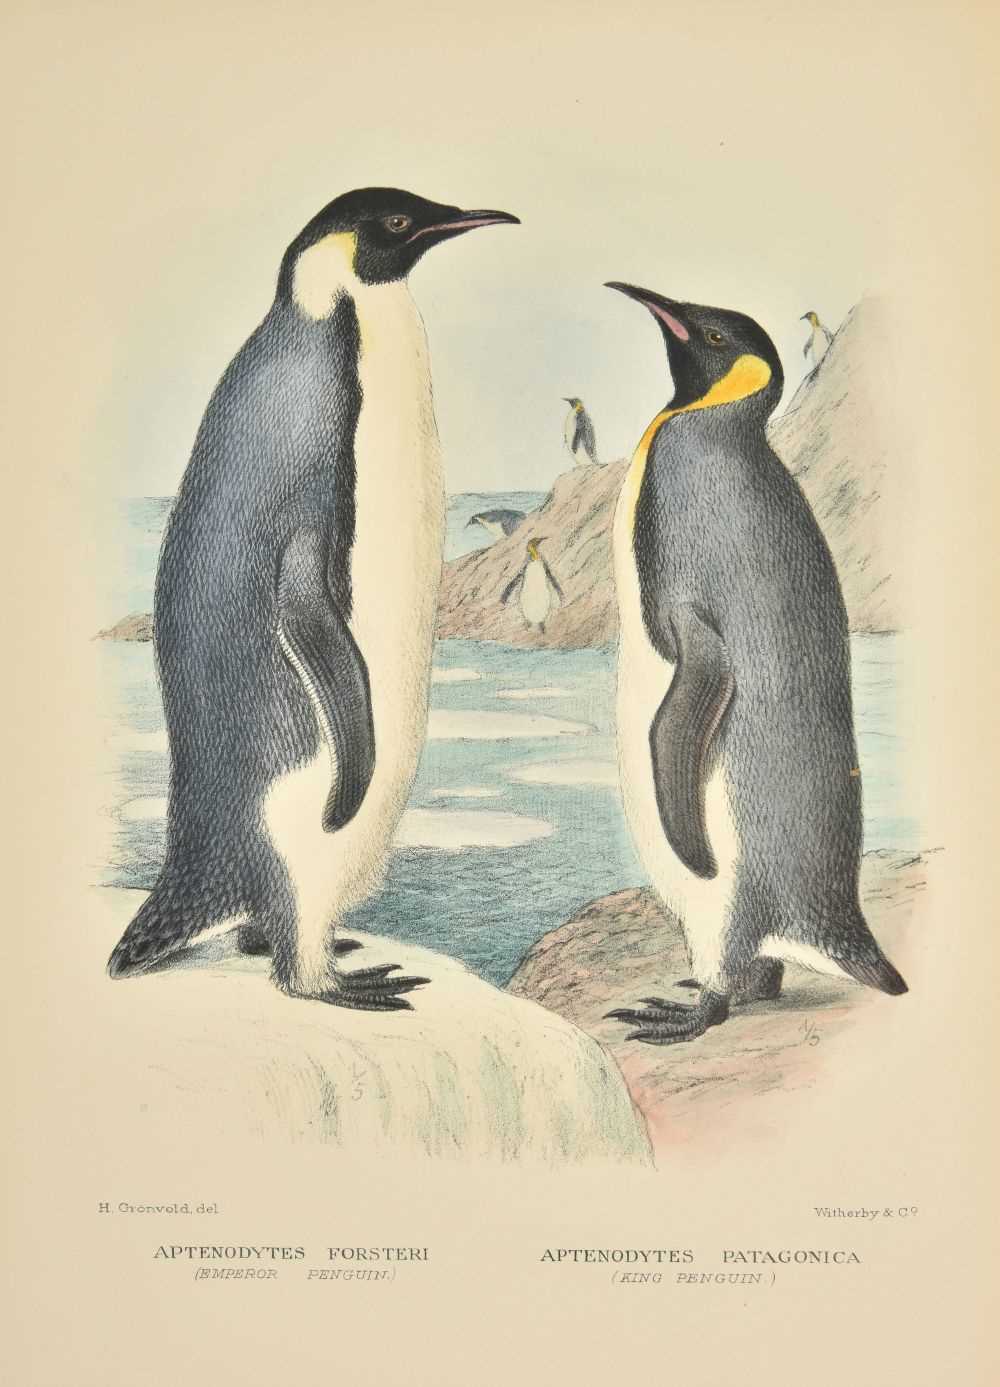 Lot 91 - Mathews (Gregory M.)  The Birds of Norfolk and Lord Howe Islands, 1st edition, 1928